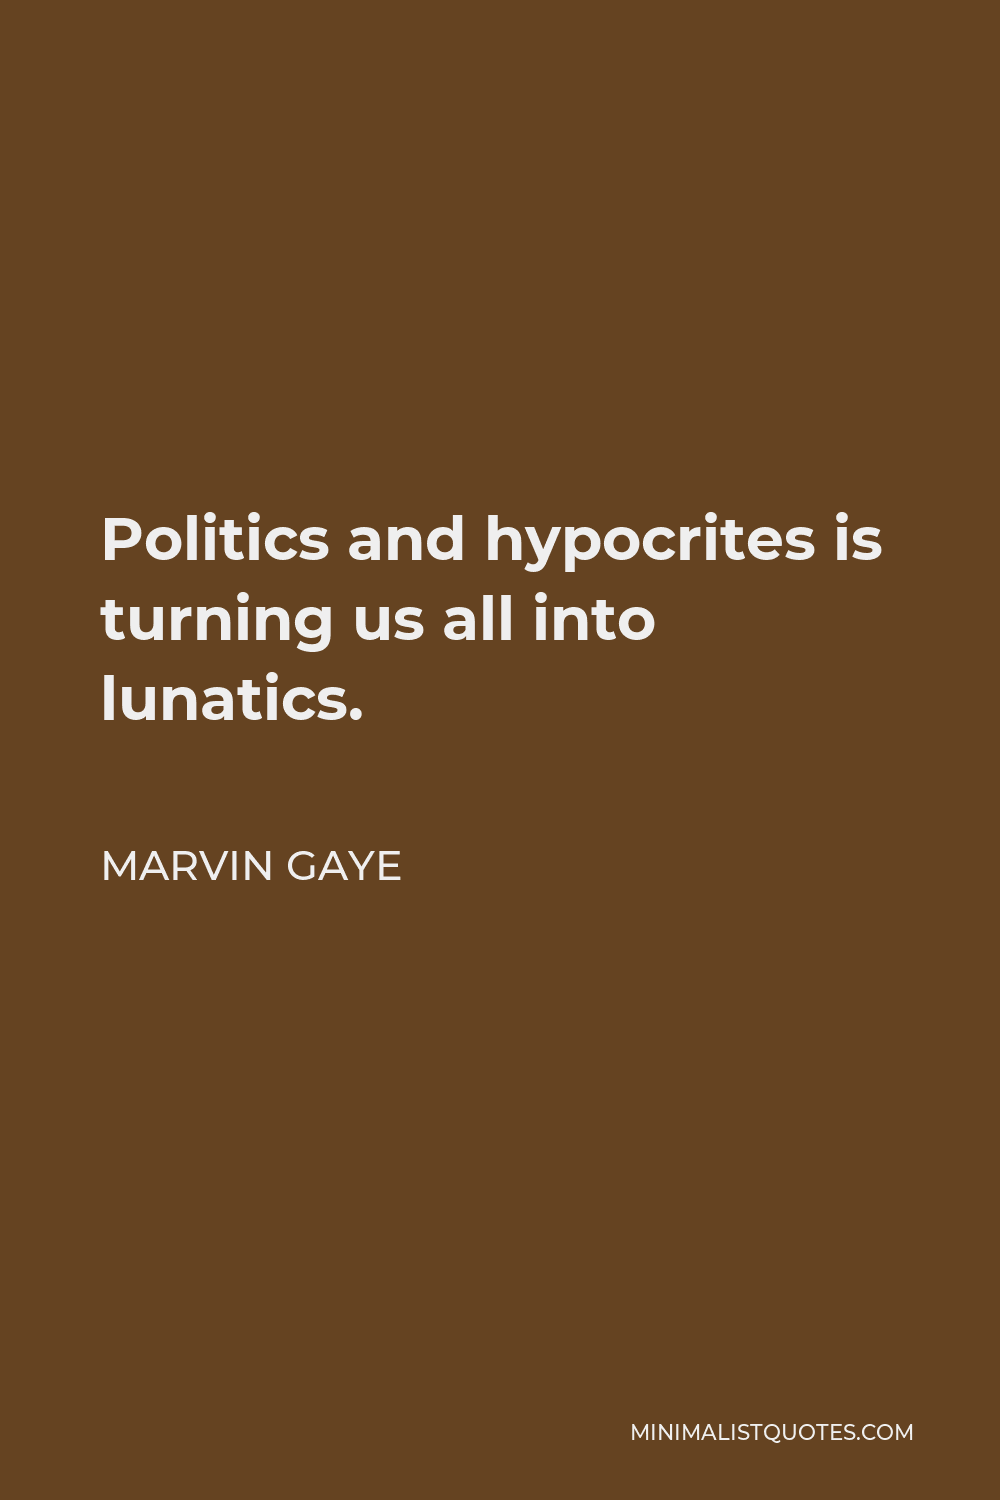 Marvin Gaye Quote - Politics and hypocrites is turning us all into lunatics.